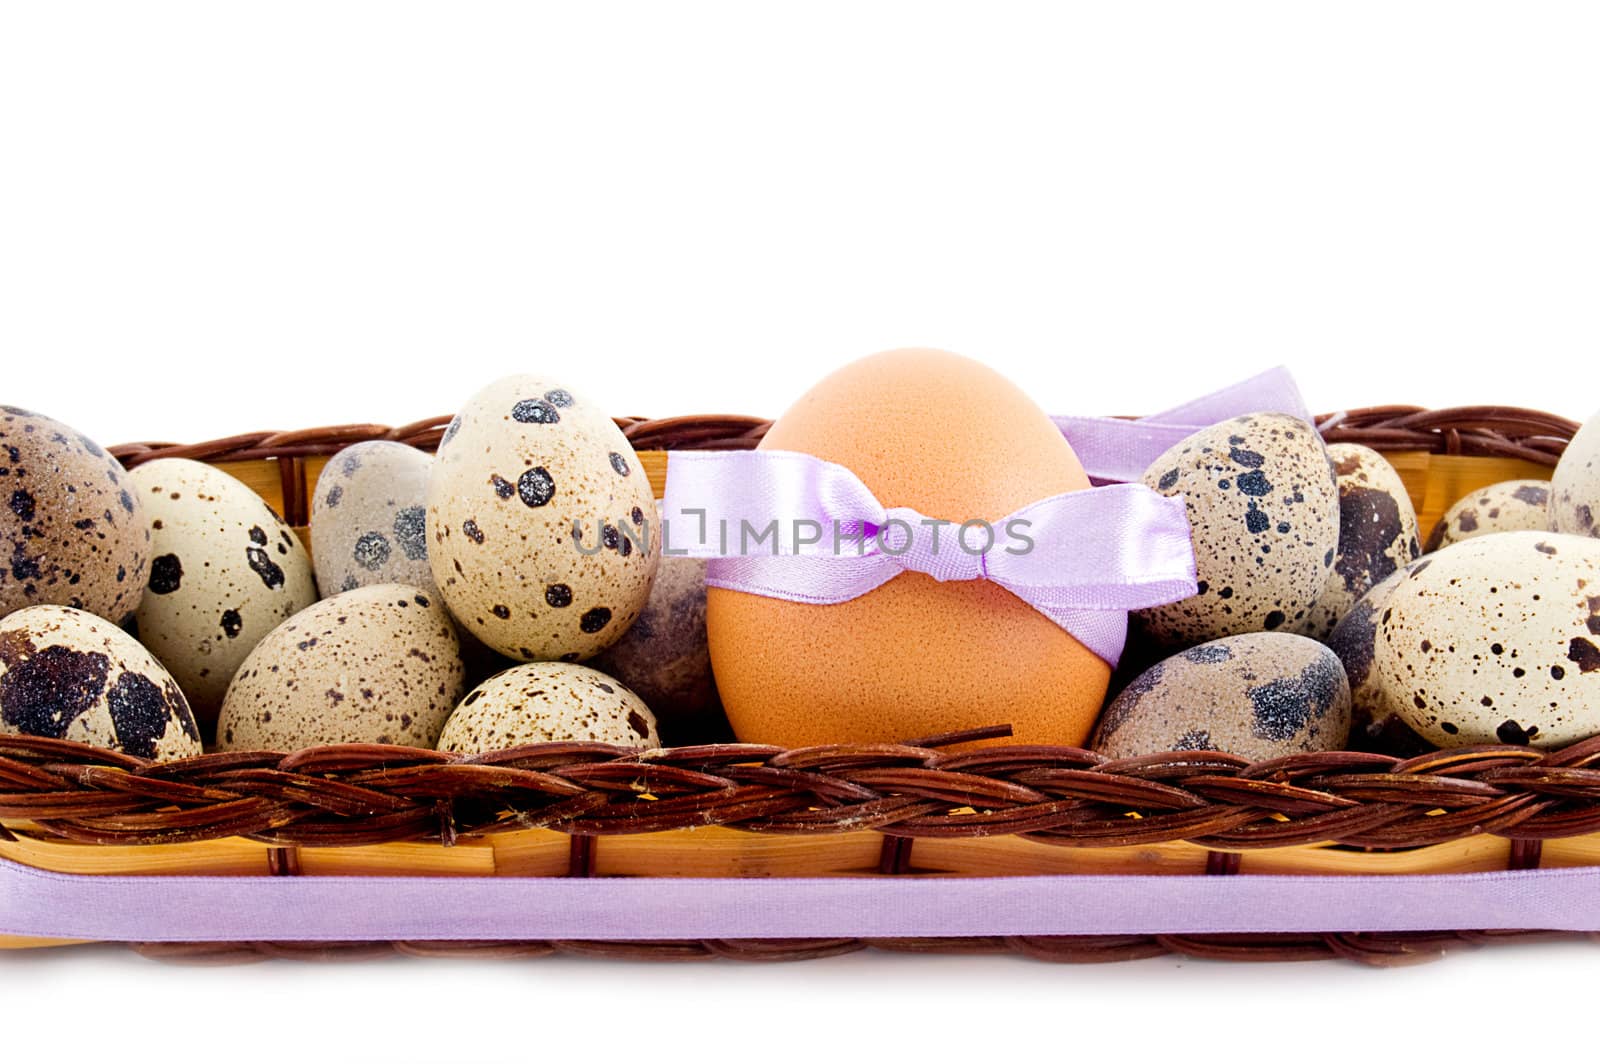 Quail and chicken eggs in basket over white